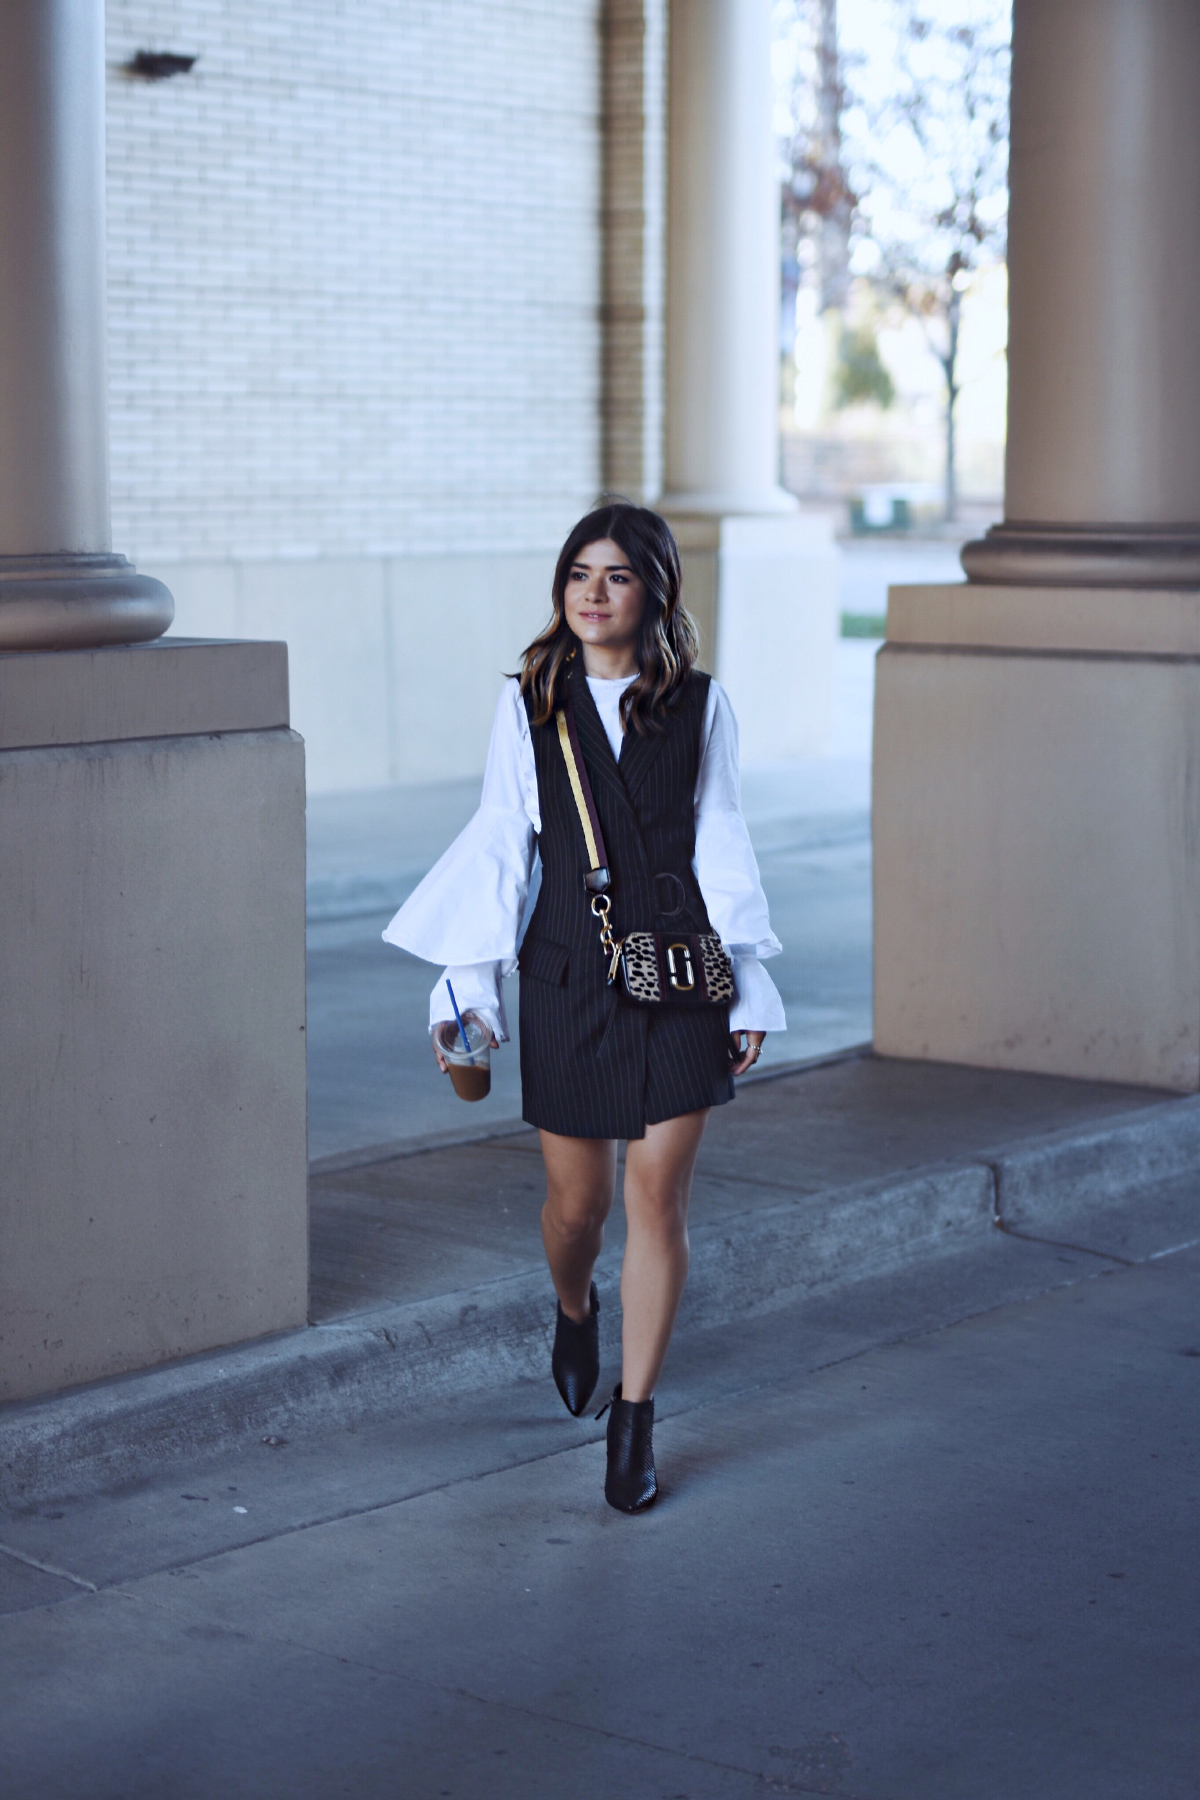 Carolina Hellal of Chic Talk wearing an Urban outfitters dress, Style mafia bell sleeve top, Marc Jacobs bag and Johnston and Murphy ankle boots